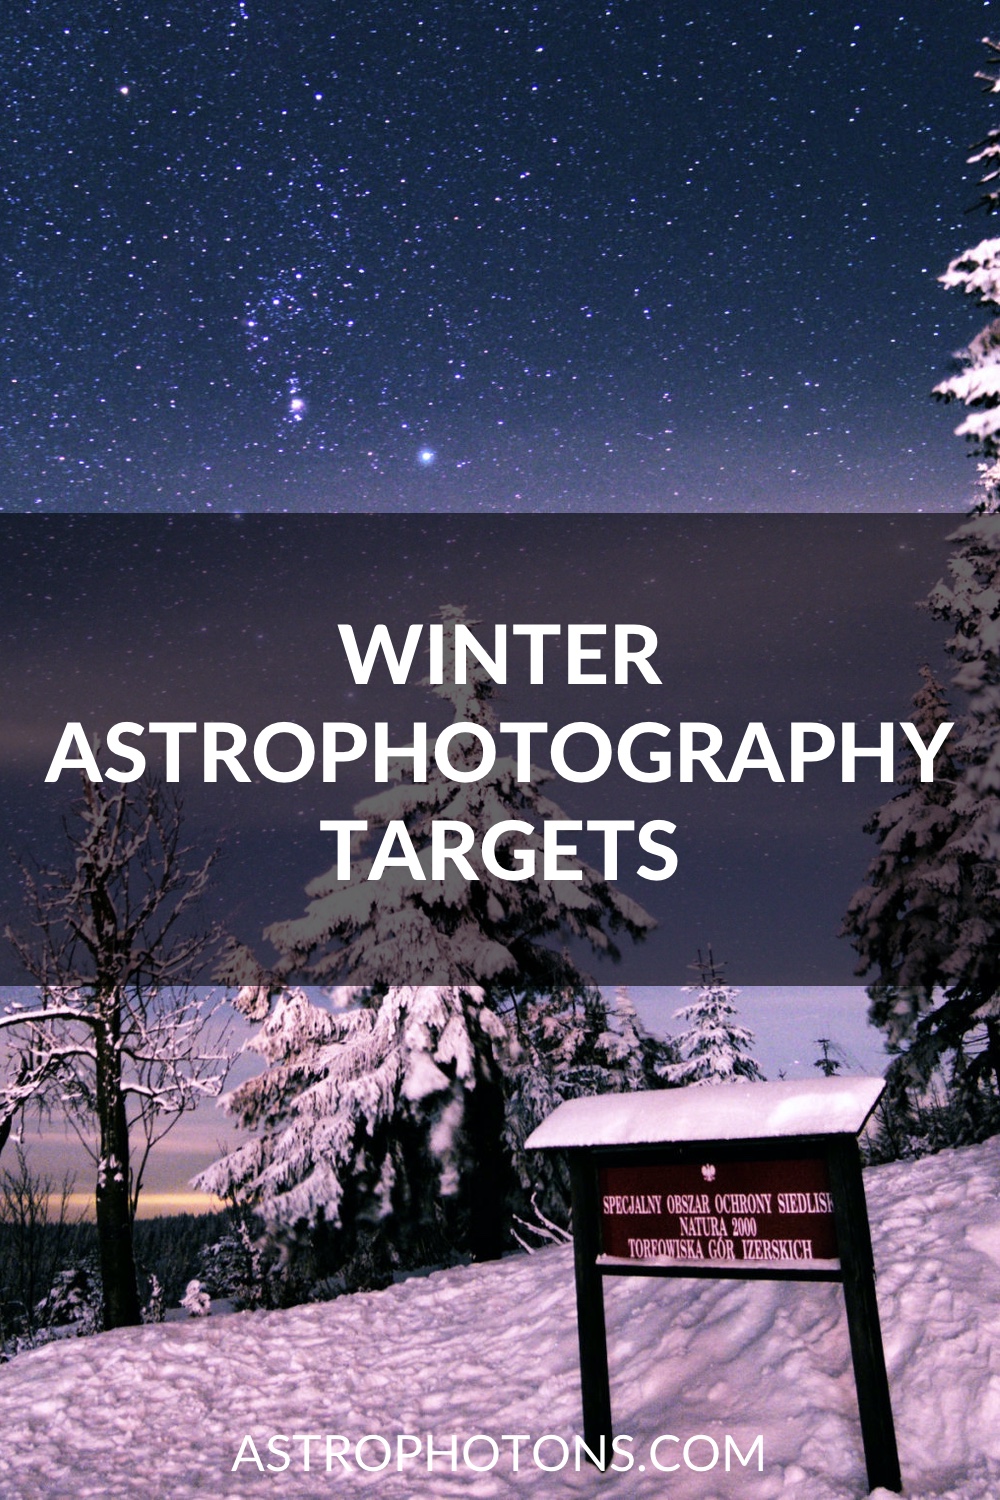 Winter Astrophotography Targets